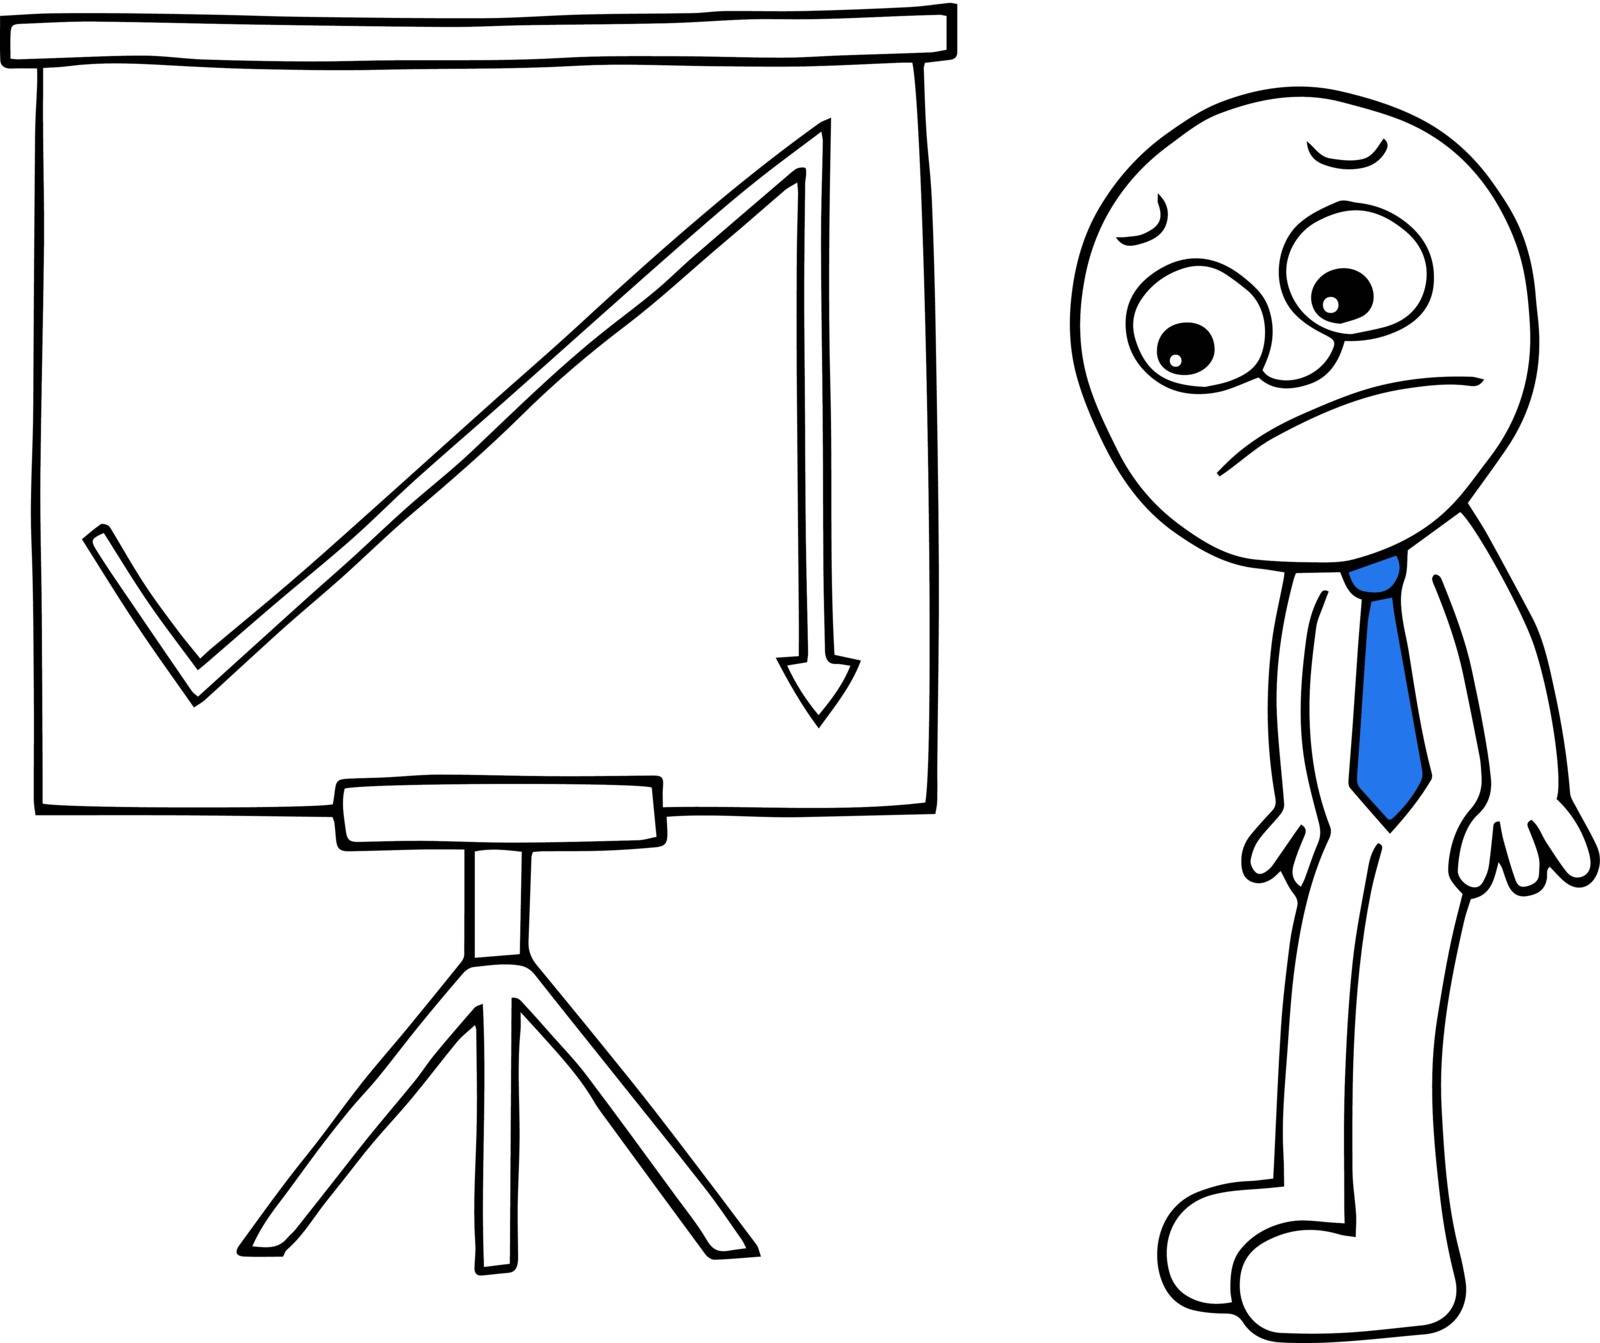 Hand drawn cartoon businessman sad with standing sales chart arrow suddenly going down symbolizing sudden losses.